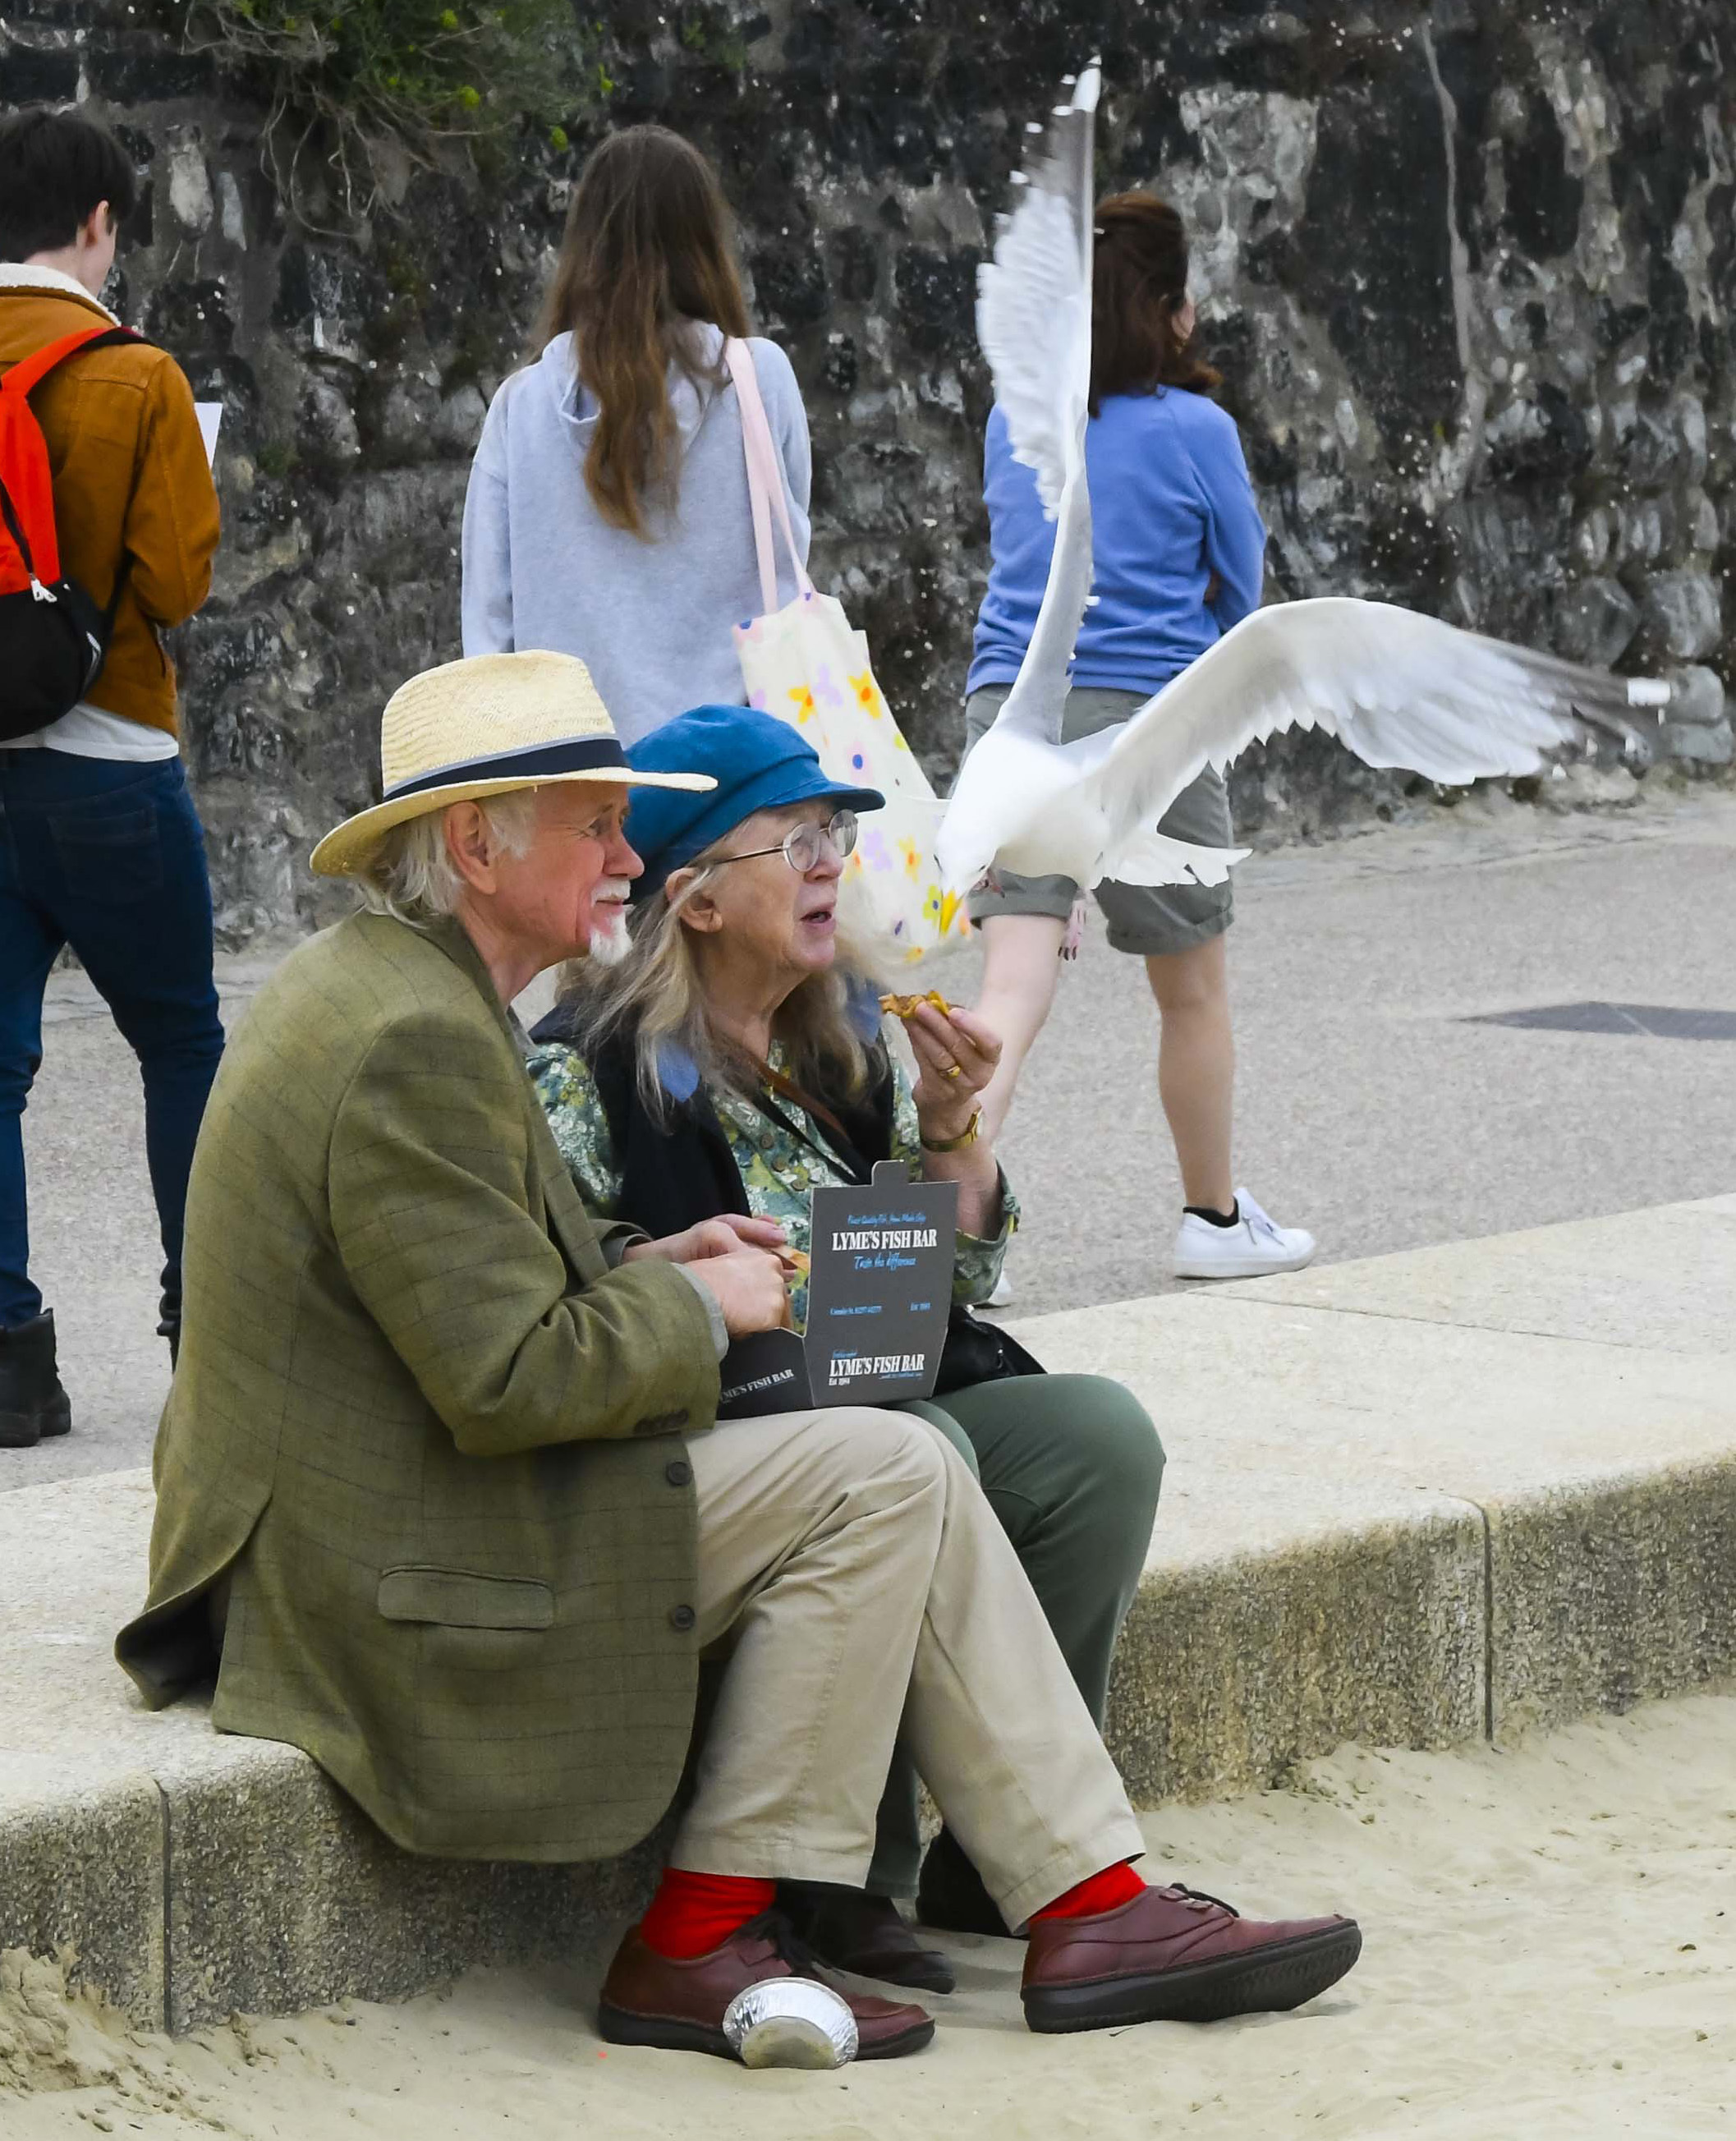 A daring seagull flies in and steals a piece of fish from the fingers of a woman having lunch with her husband at the beach at the seaside resort of Lyme Regis in Dorset. The gull swoops to grab the fish from the woman fingers 5th July 2022. Picture